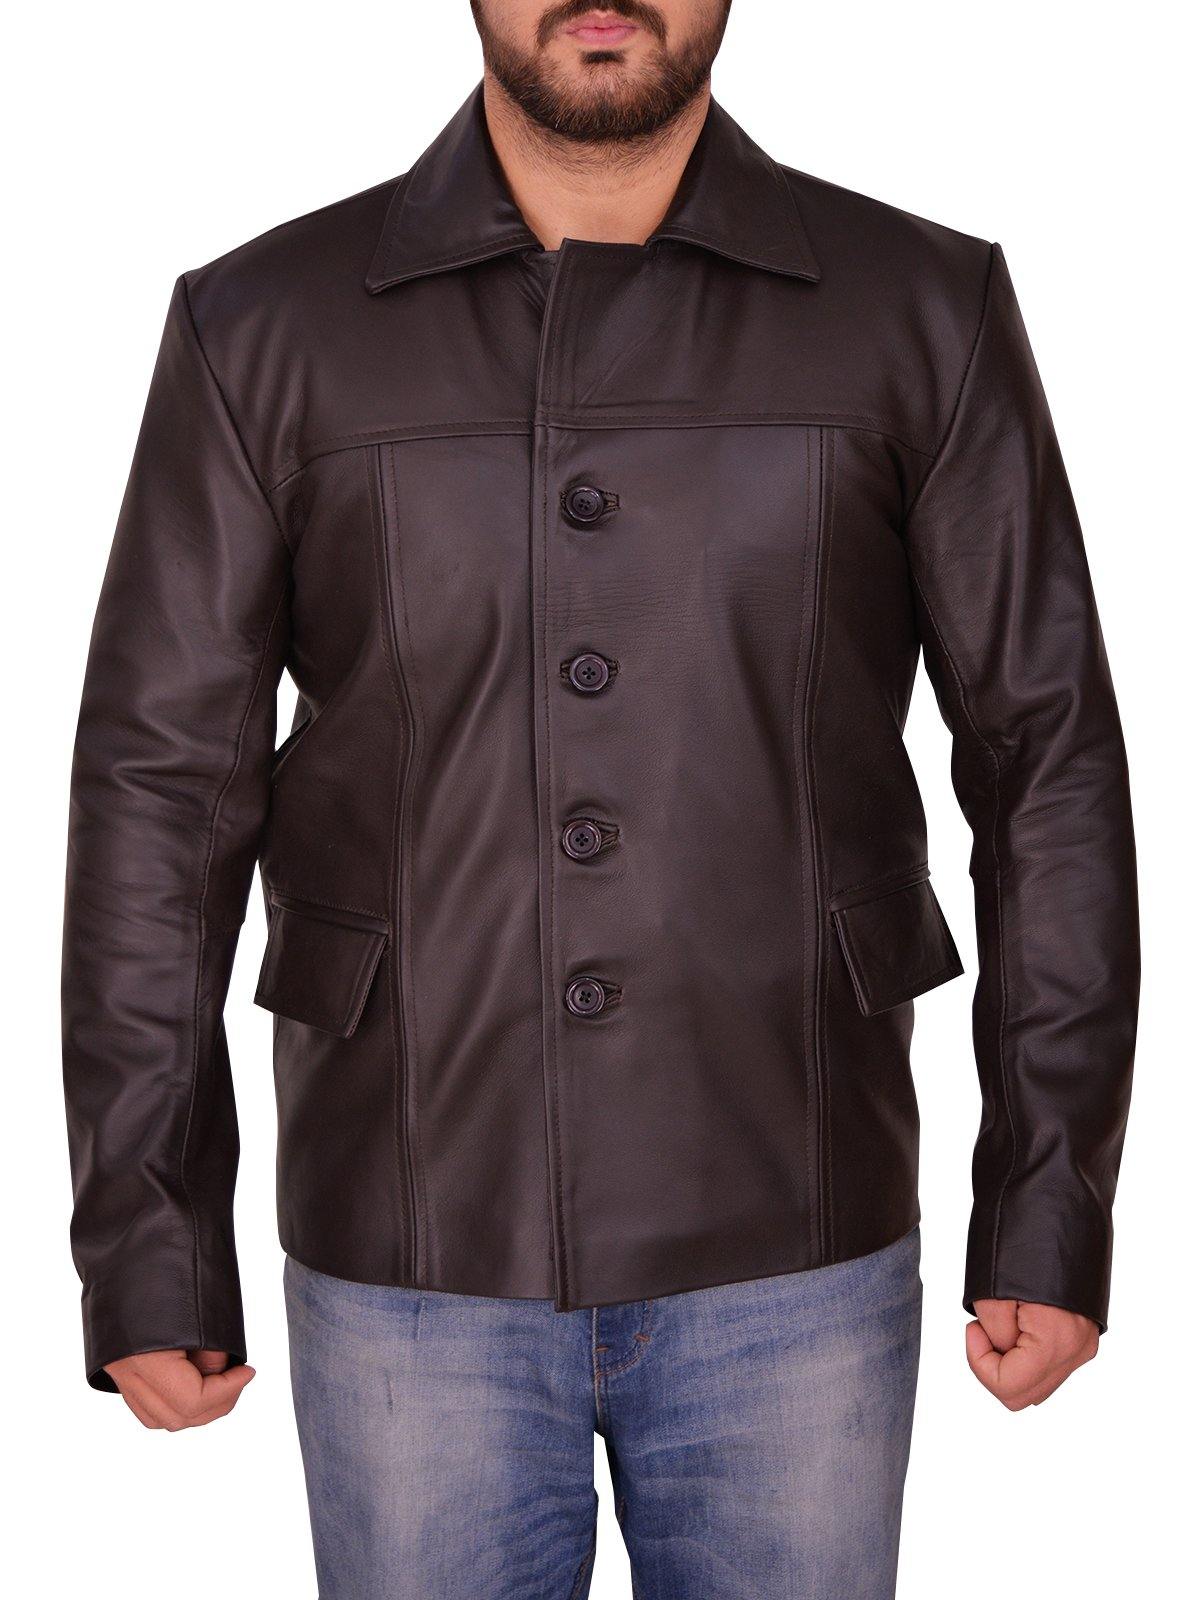 Mens Classic Brown Leather Jacket - Wiseleather